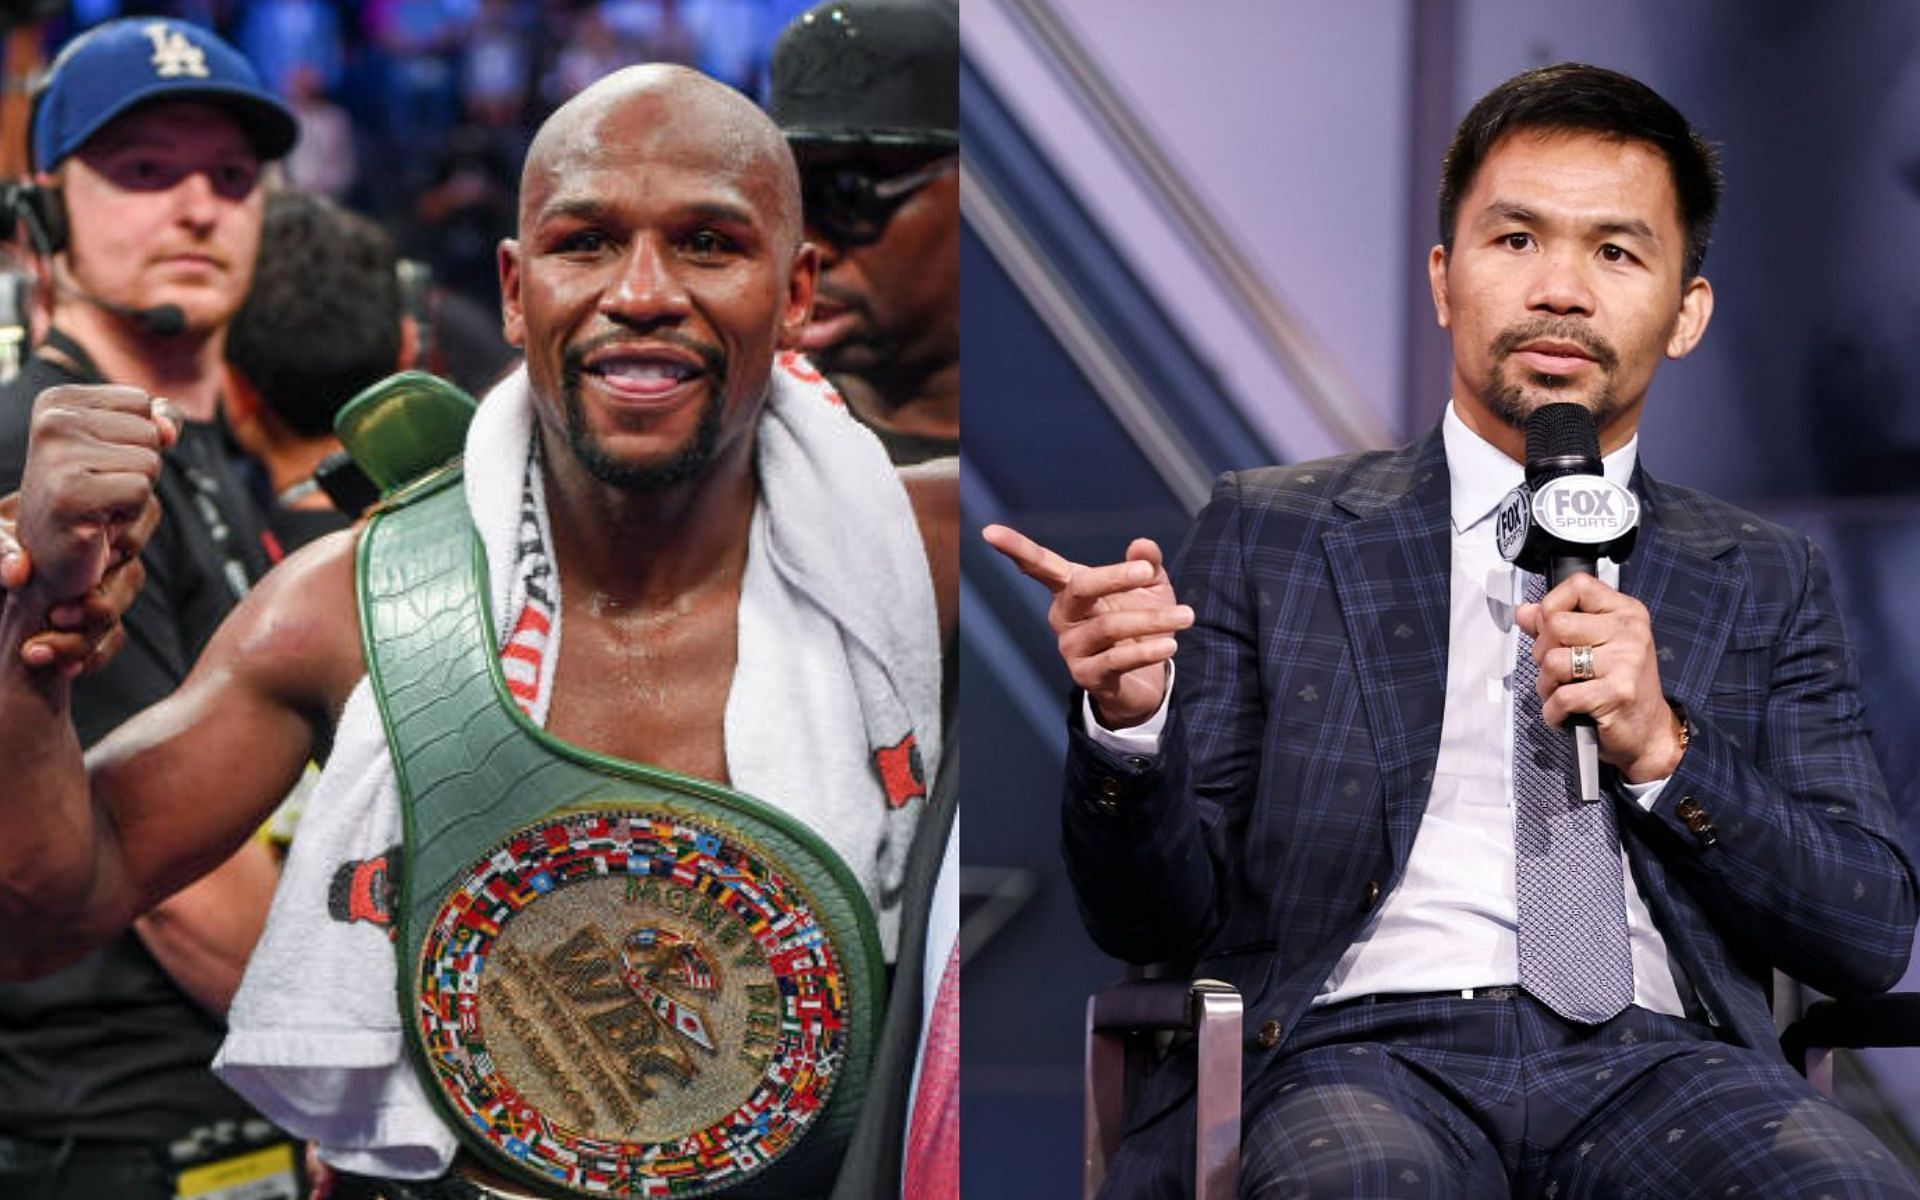 Floyd Mayweather (left) and Manny Pacquiao (right) [Images Courtesy: @GettyImages]